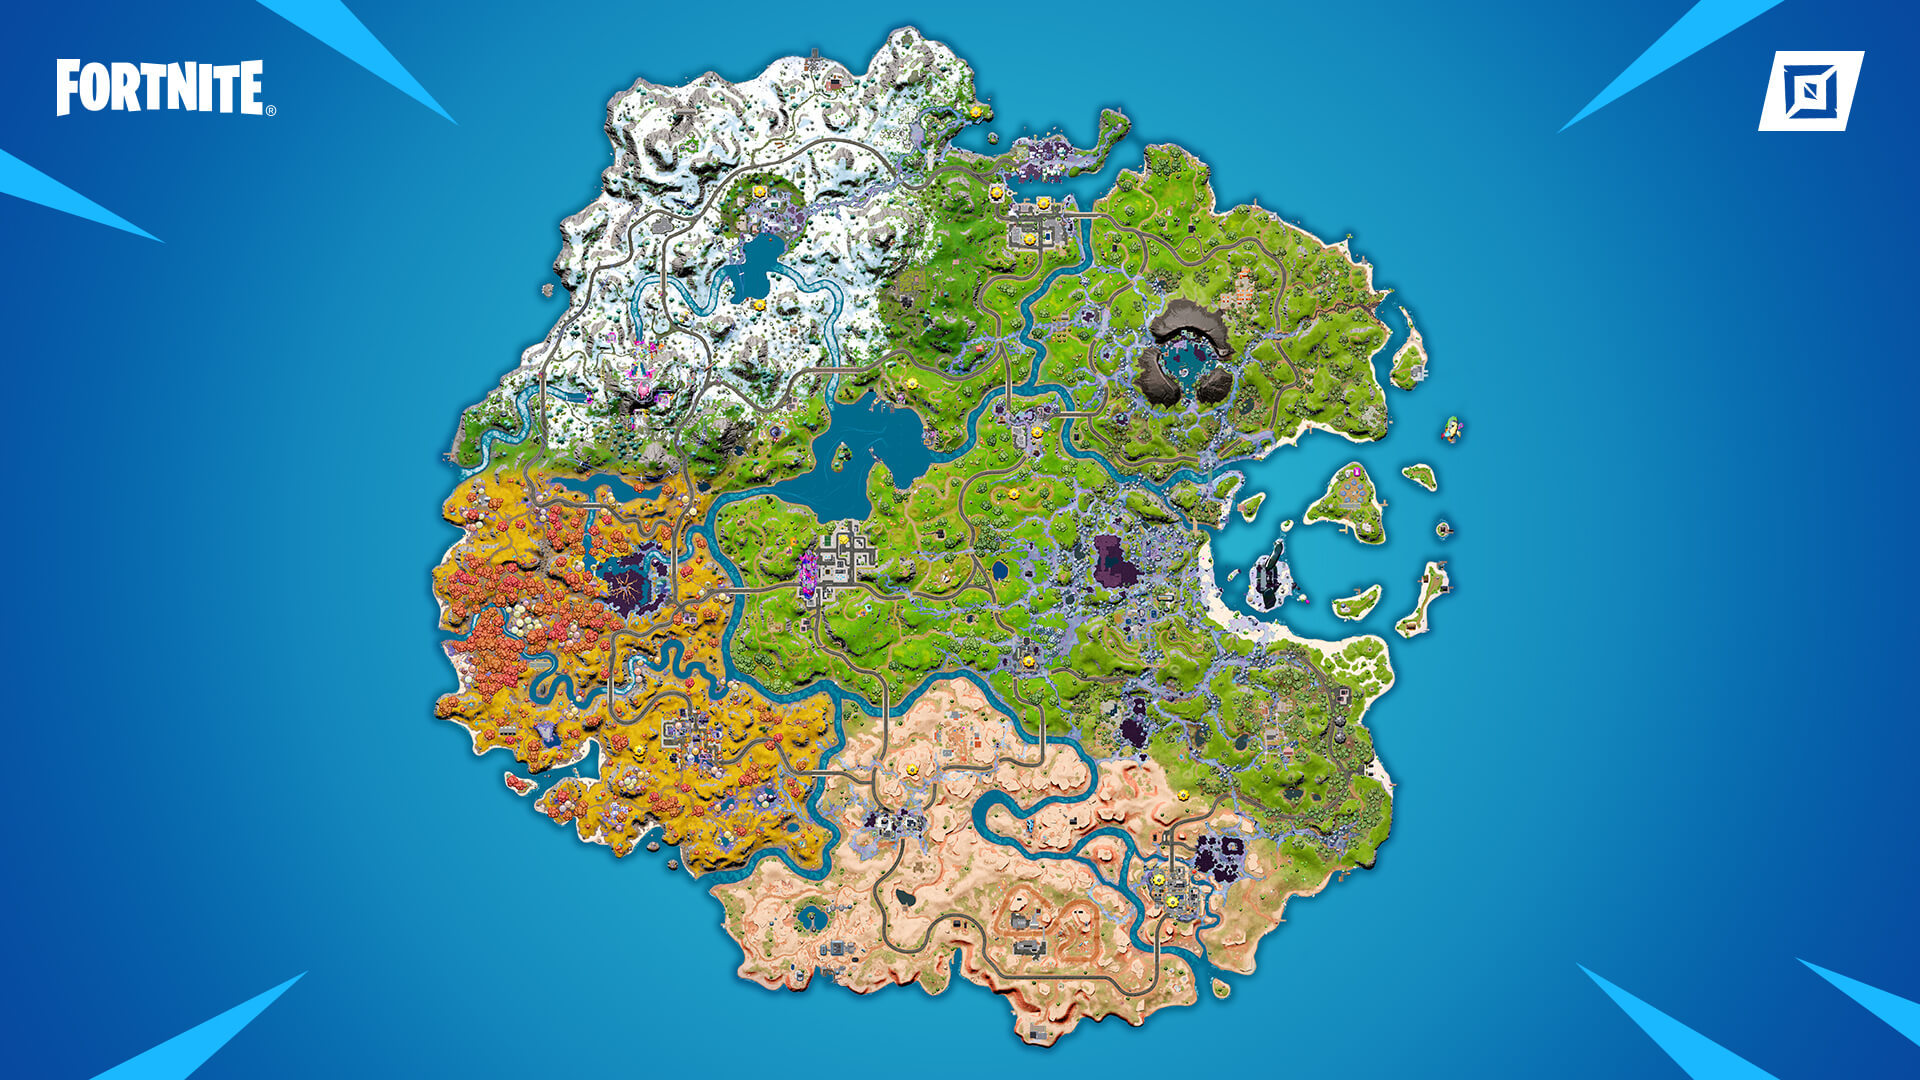 If you loved Hunter x Hunter, you'll love this Fortnite Creative Map!